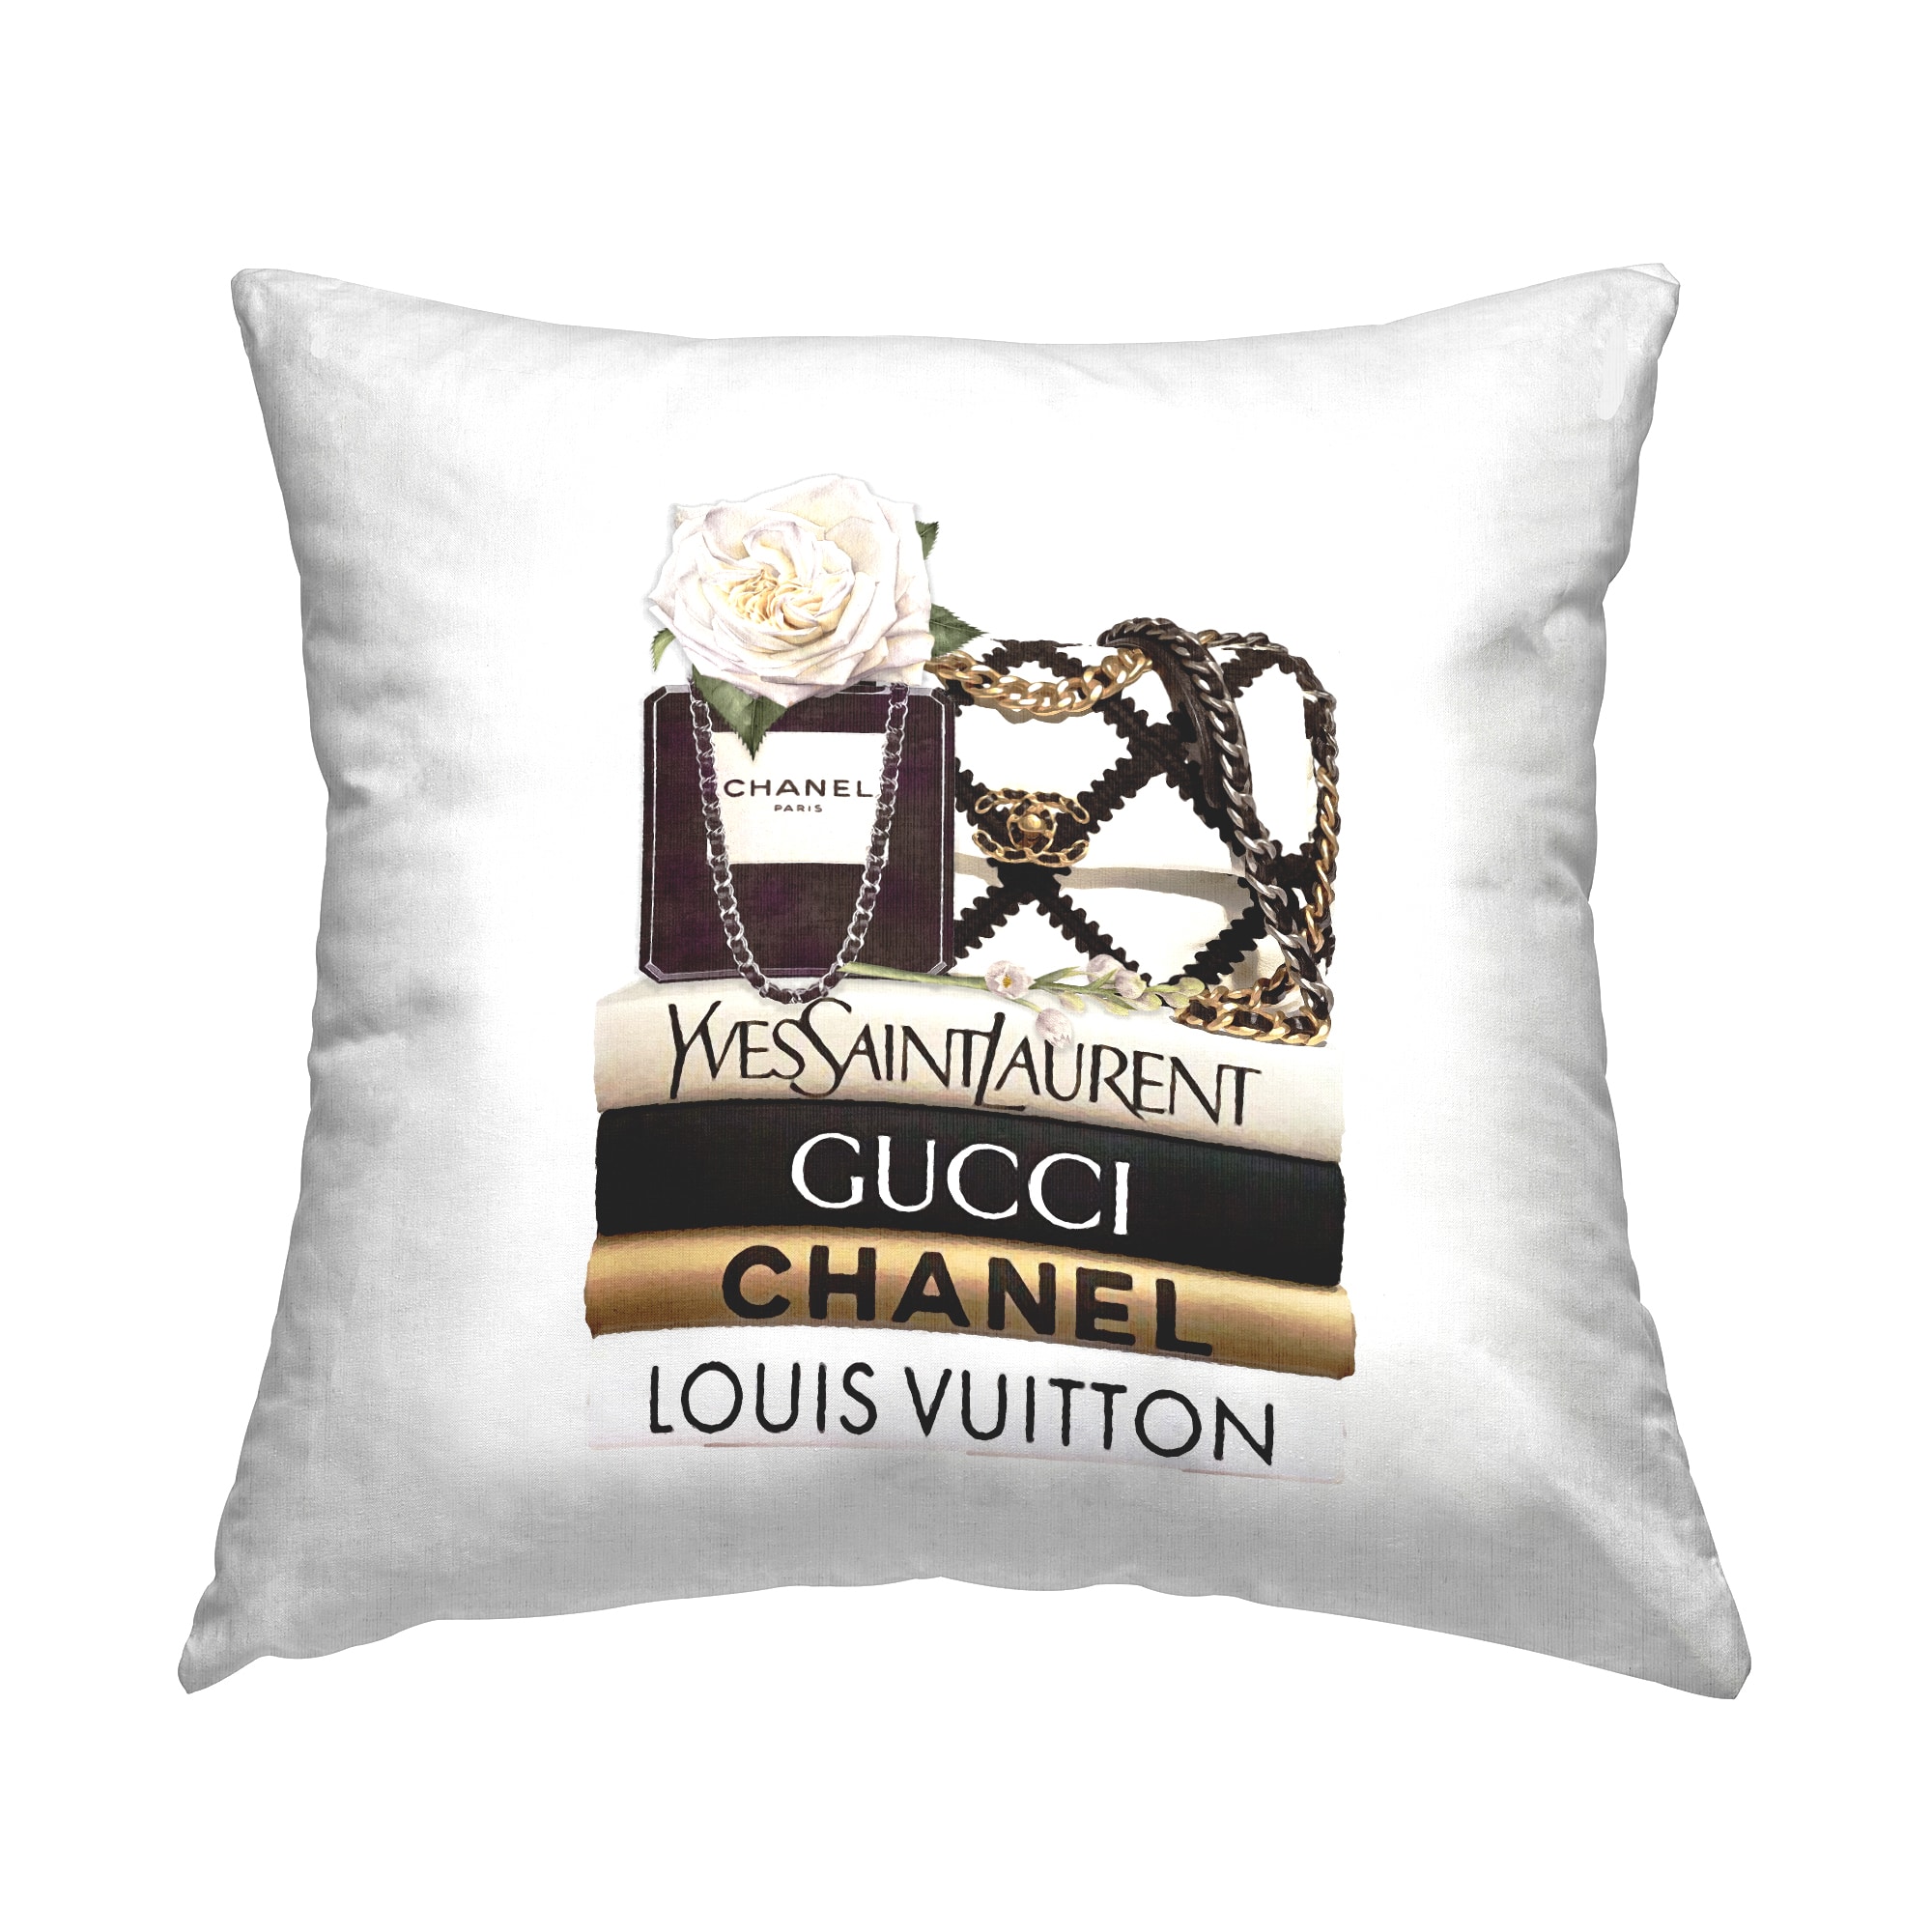 Stupell Industries Elegant Glam Fashion Floral Bag on Bookstack Decorative Printed Throw Pillow by Ros Ruseva